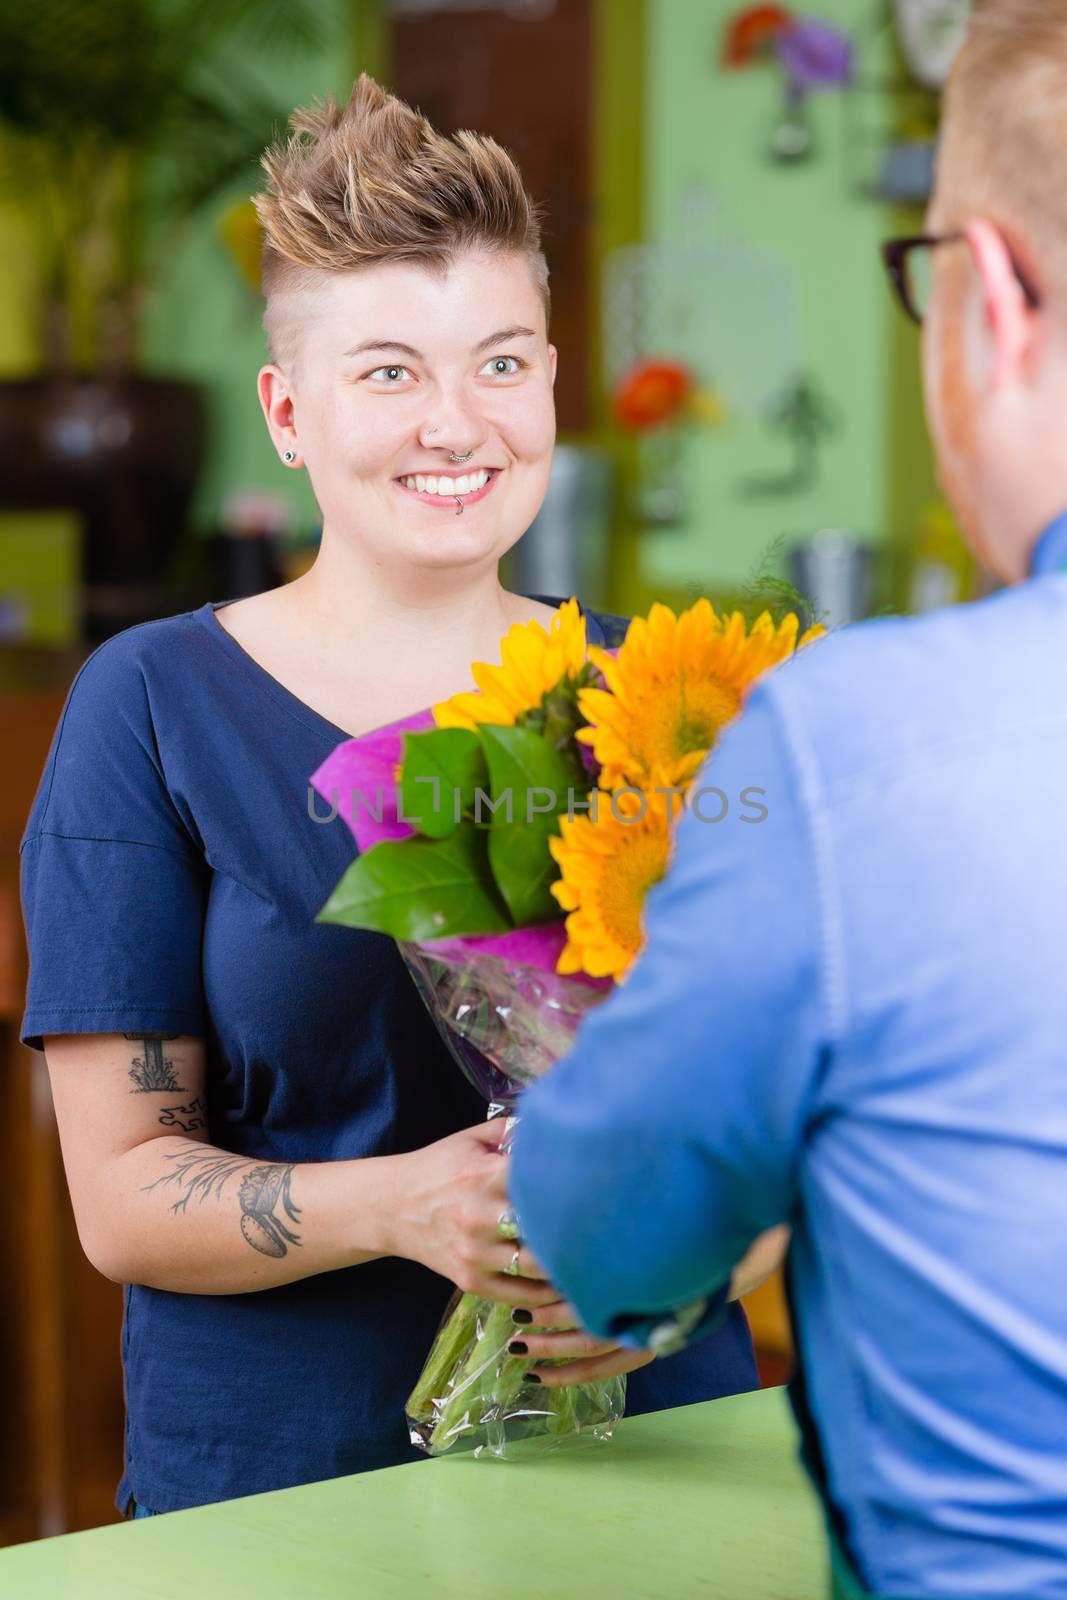 Woman buying sunflowers at a florist shop